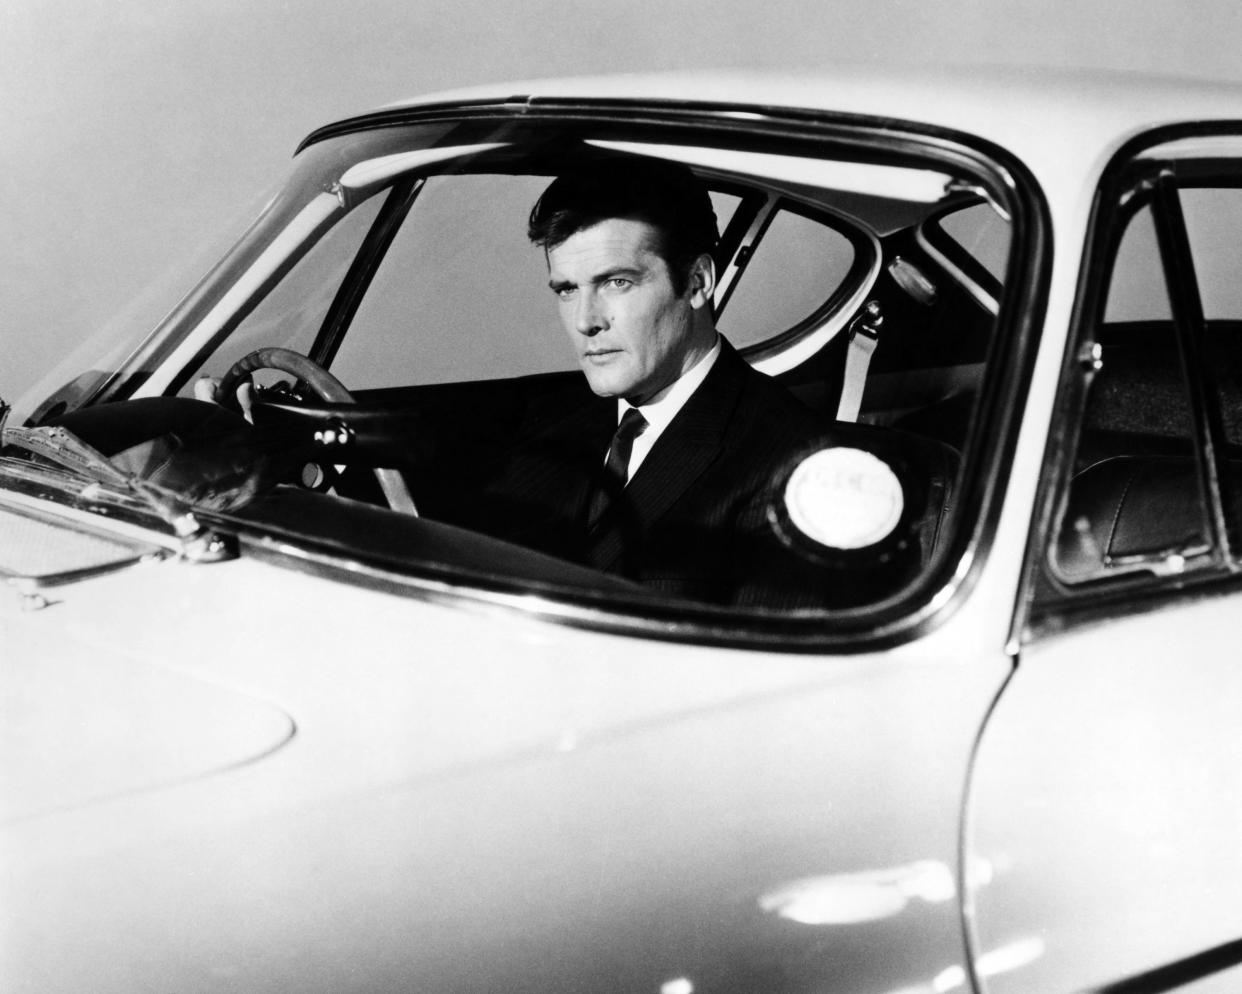 English actor Roger Moore as Simon Templar, in a promotional portrait at the wheel of a Volvo P1800 sports car, for the British spy thriller TV series 'The Saint', circa 1965. (Photo by Silver Screen Collection/Getty Images)